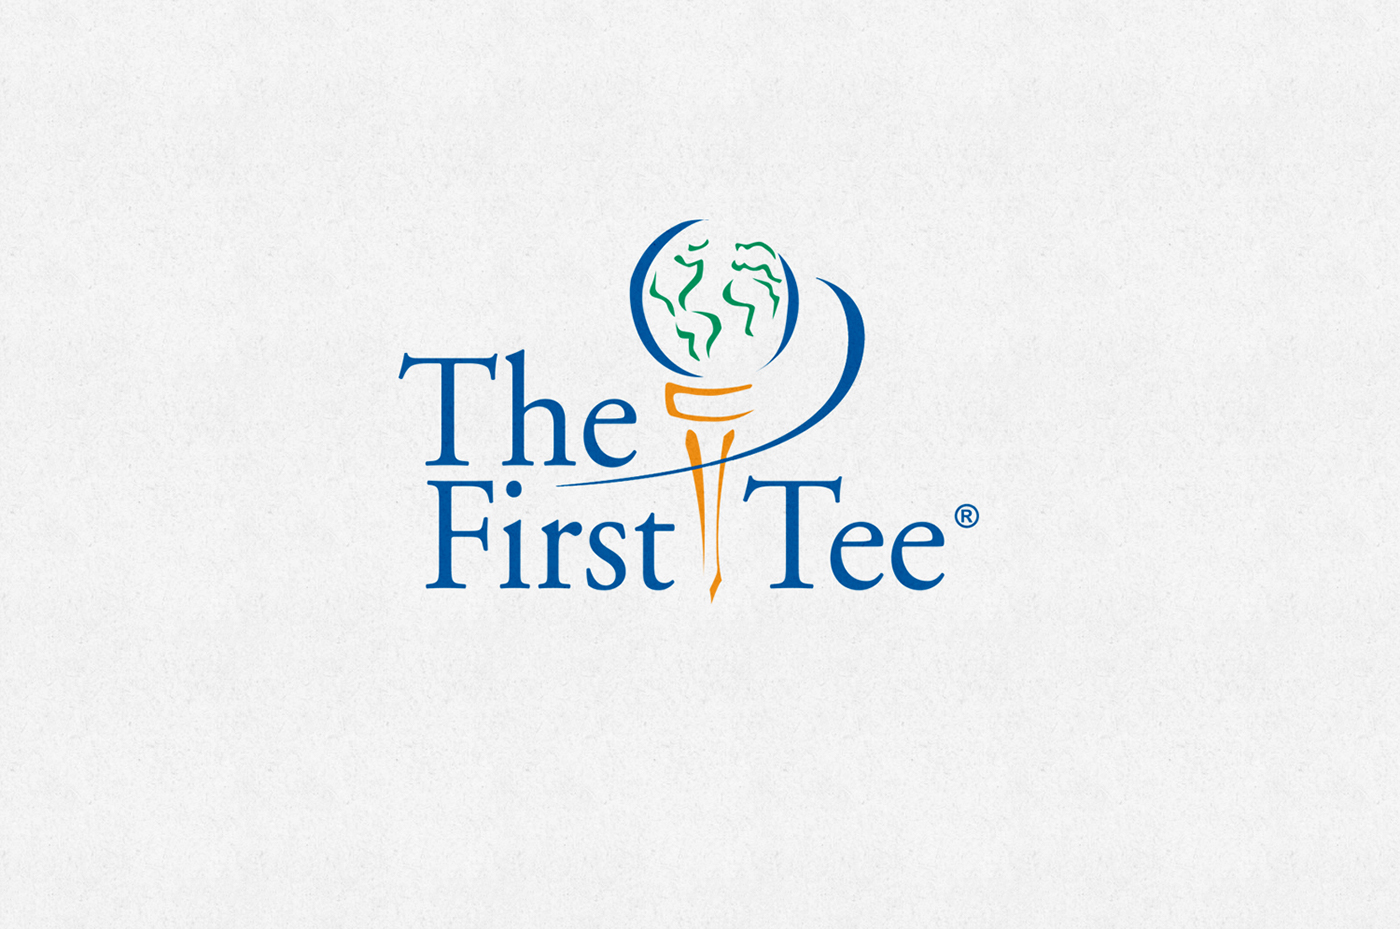 TheFirstTee golf kids kids golf The First Tee marcpuhala Marc Puhala CCAD columbus remember campaign ad series